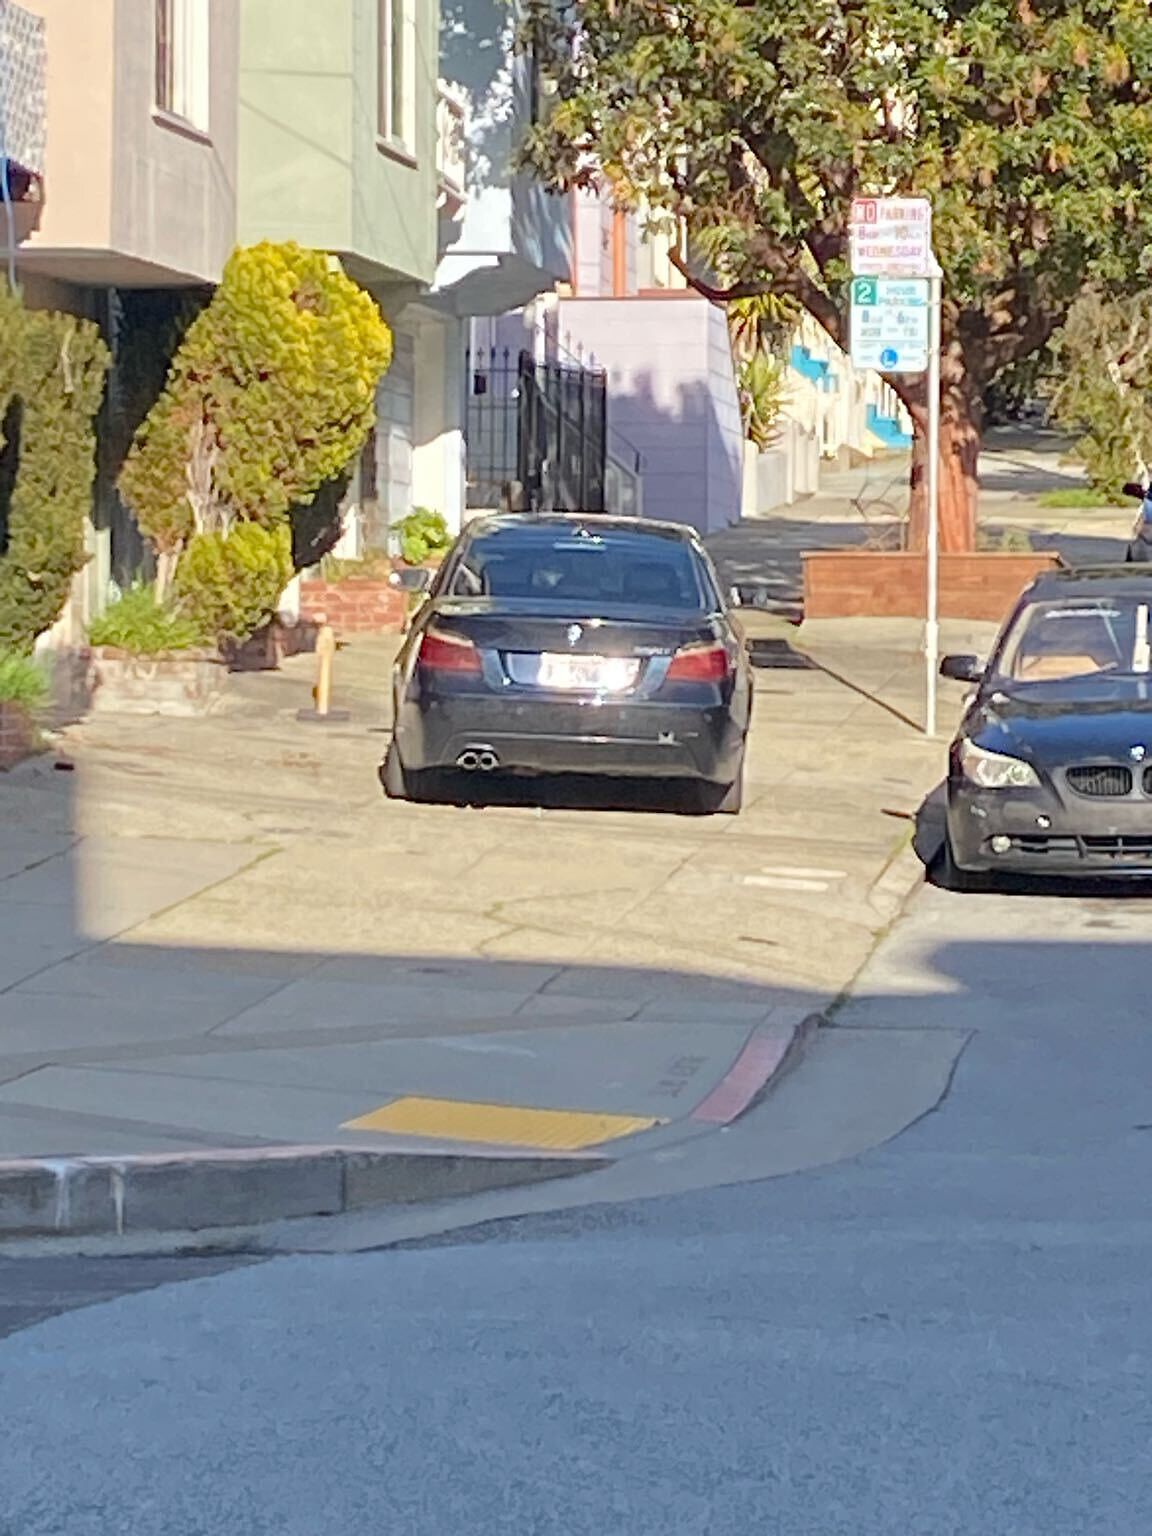 Photo of car in the street with license plate ILLEGIB in California